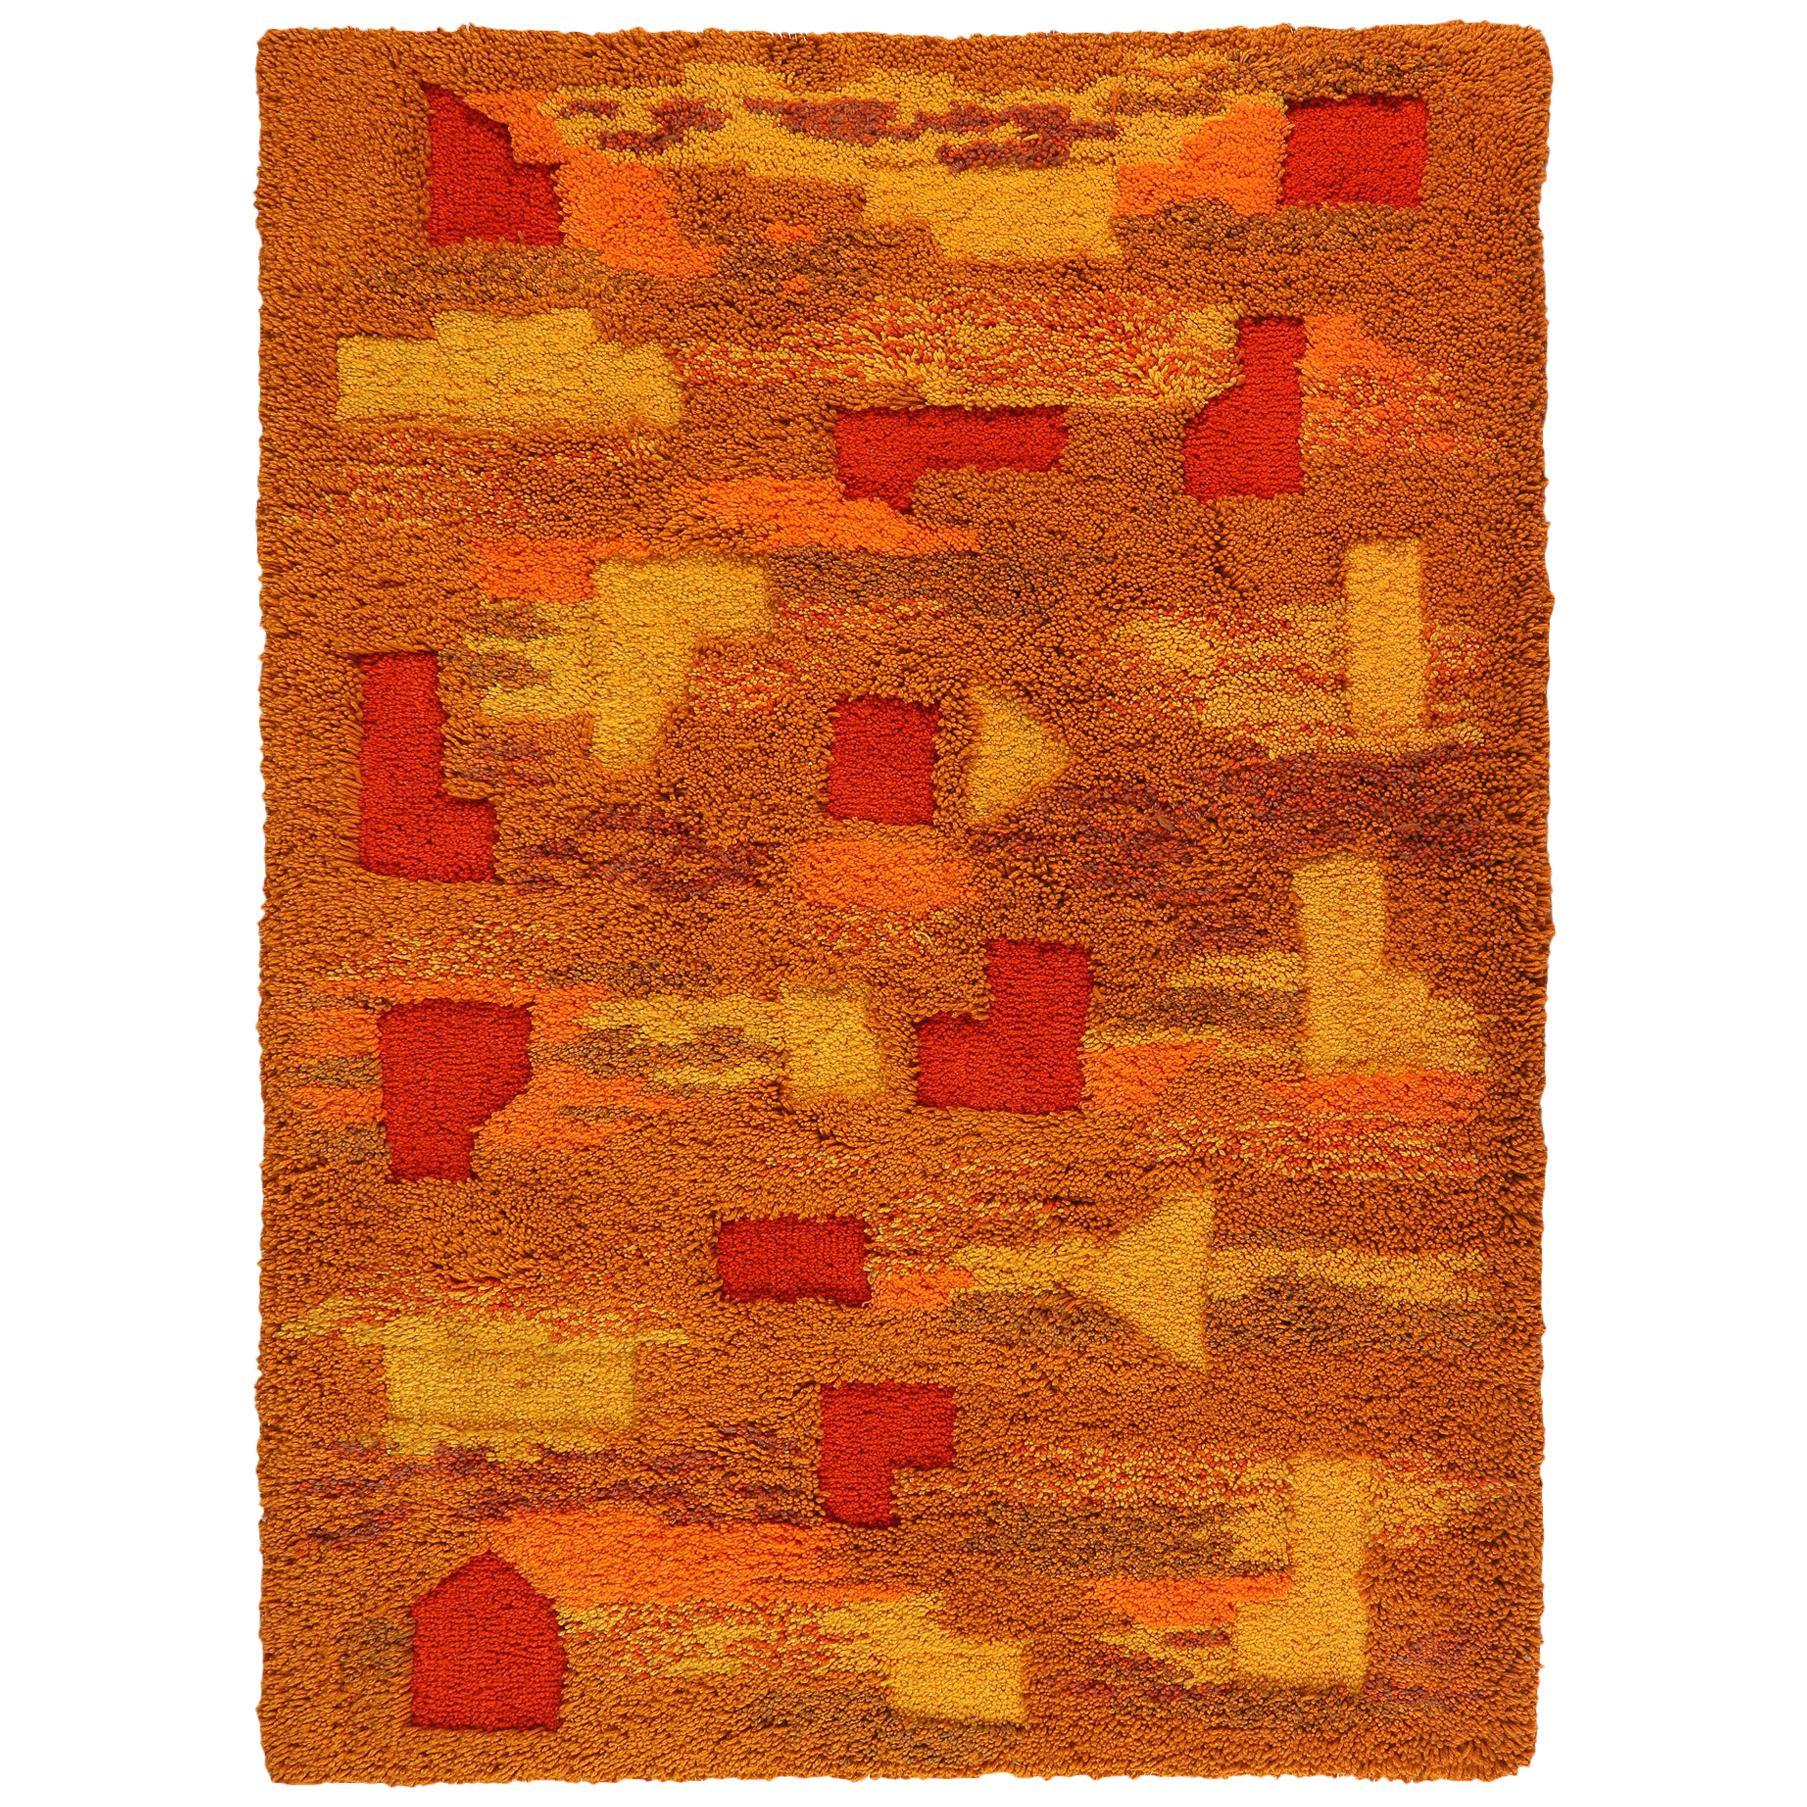 Orange and Yellow Op Pop Mod Woven Tapestry or Rug